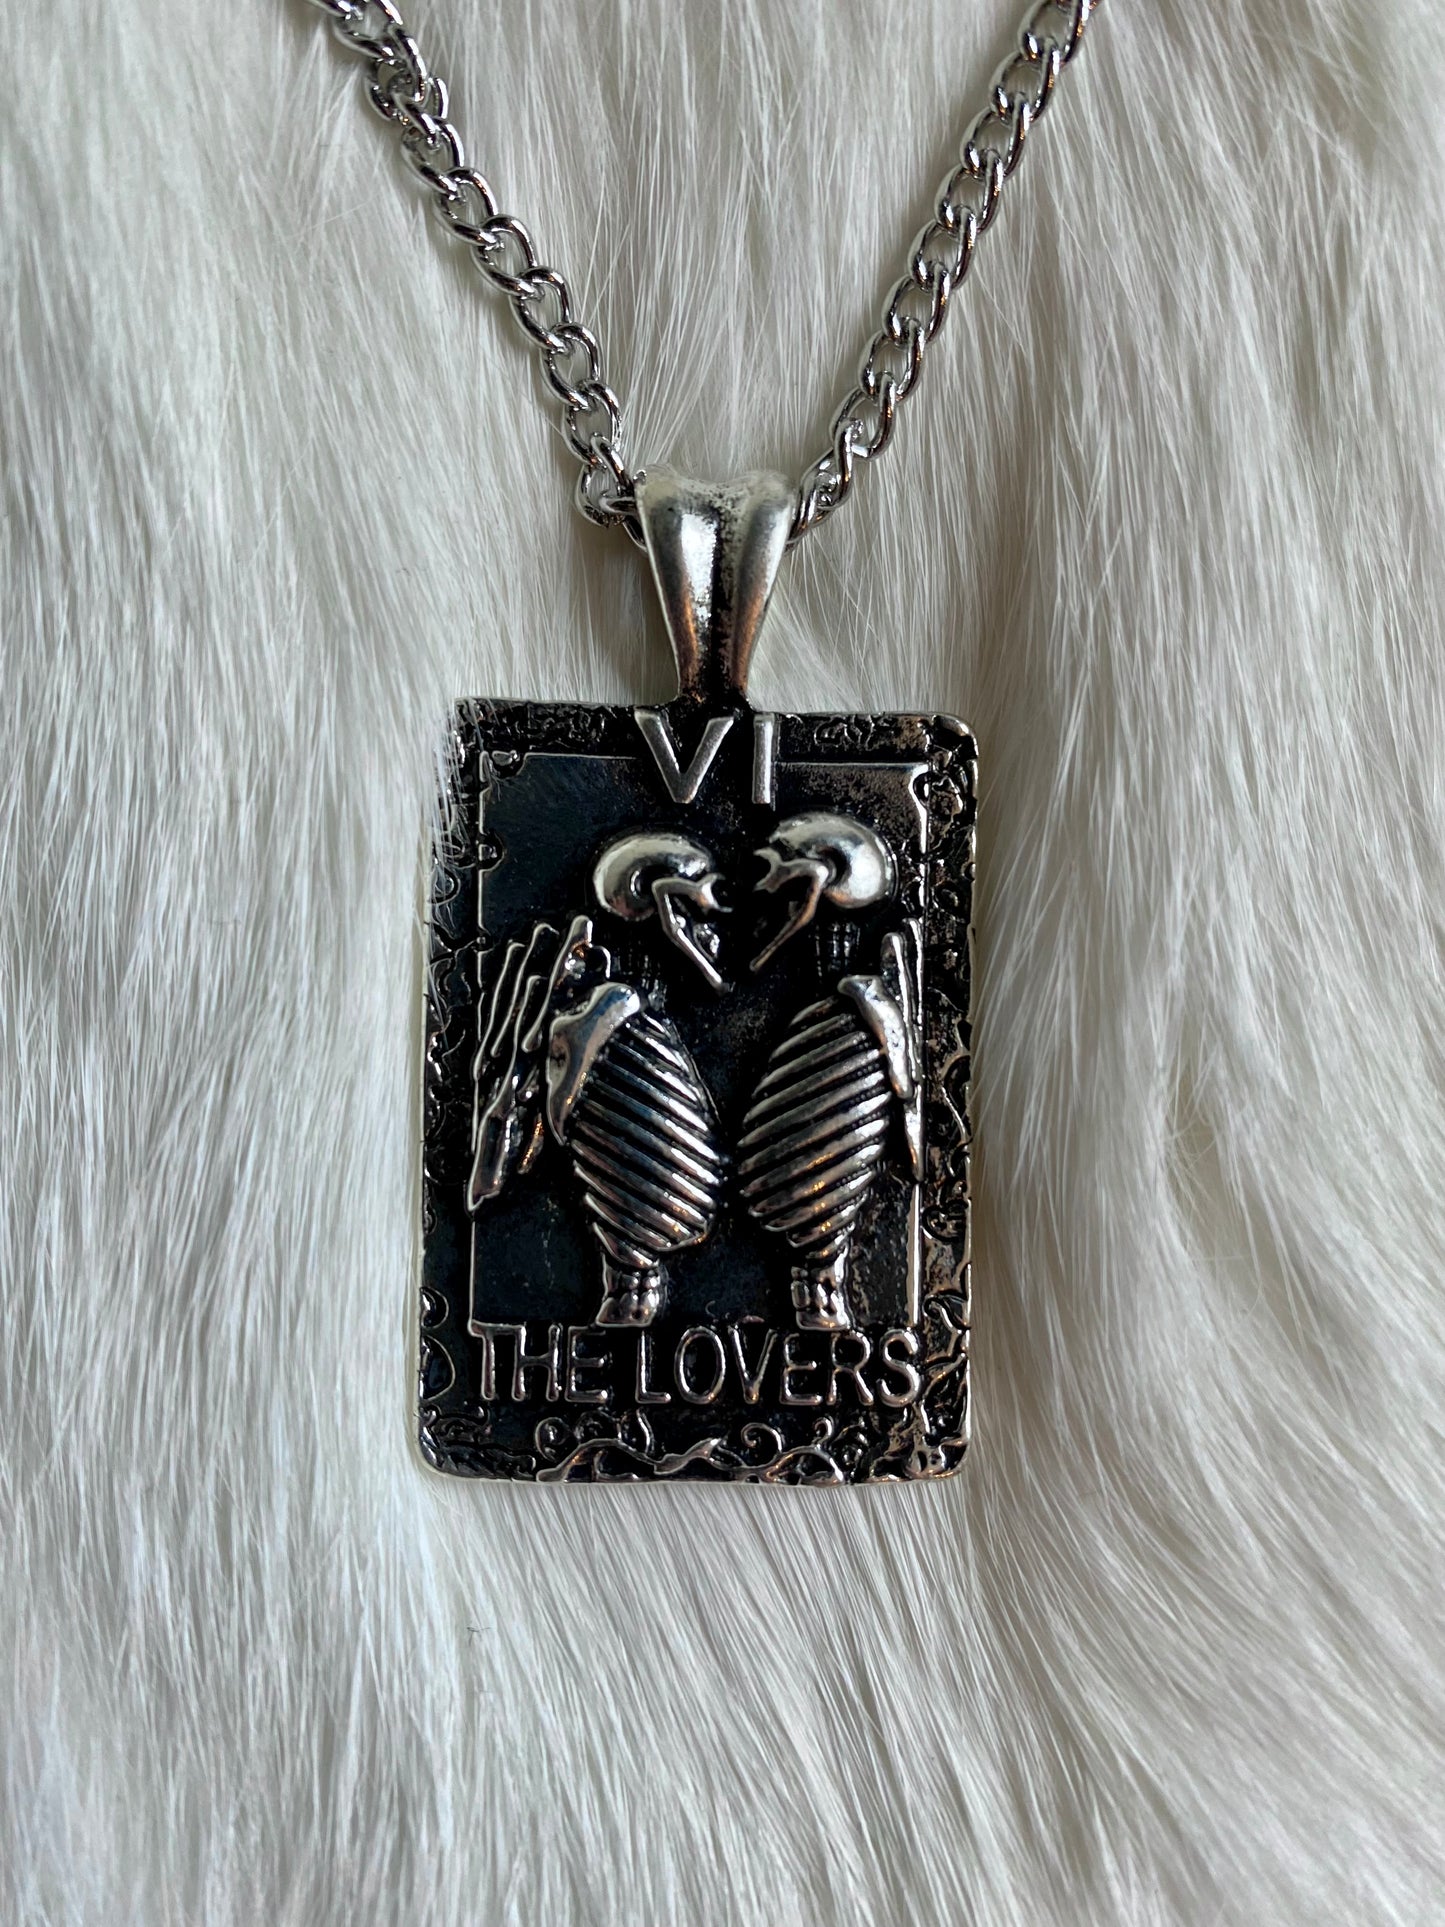 “The Lovers” Tarot Card Necklace